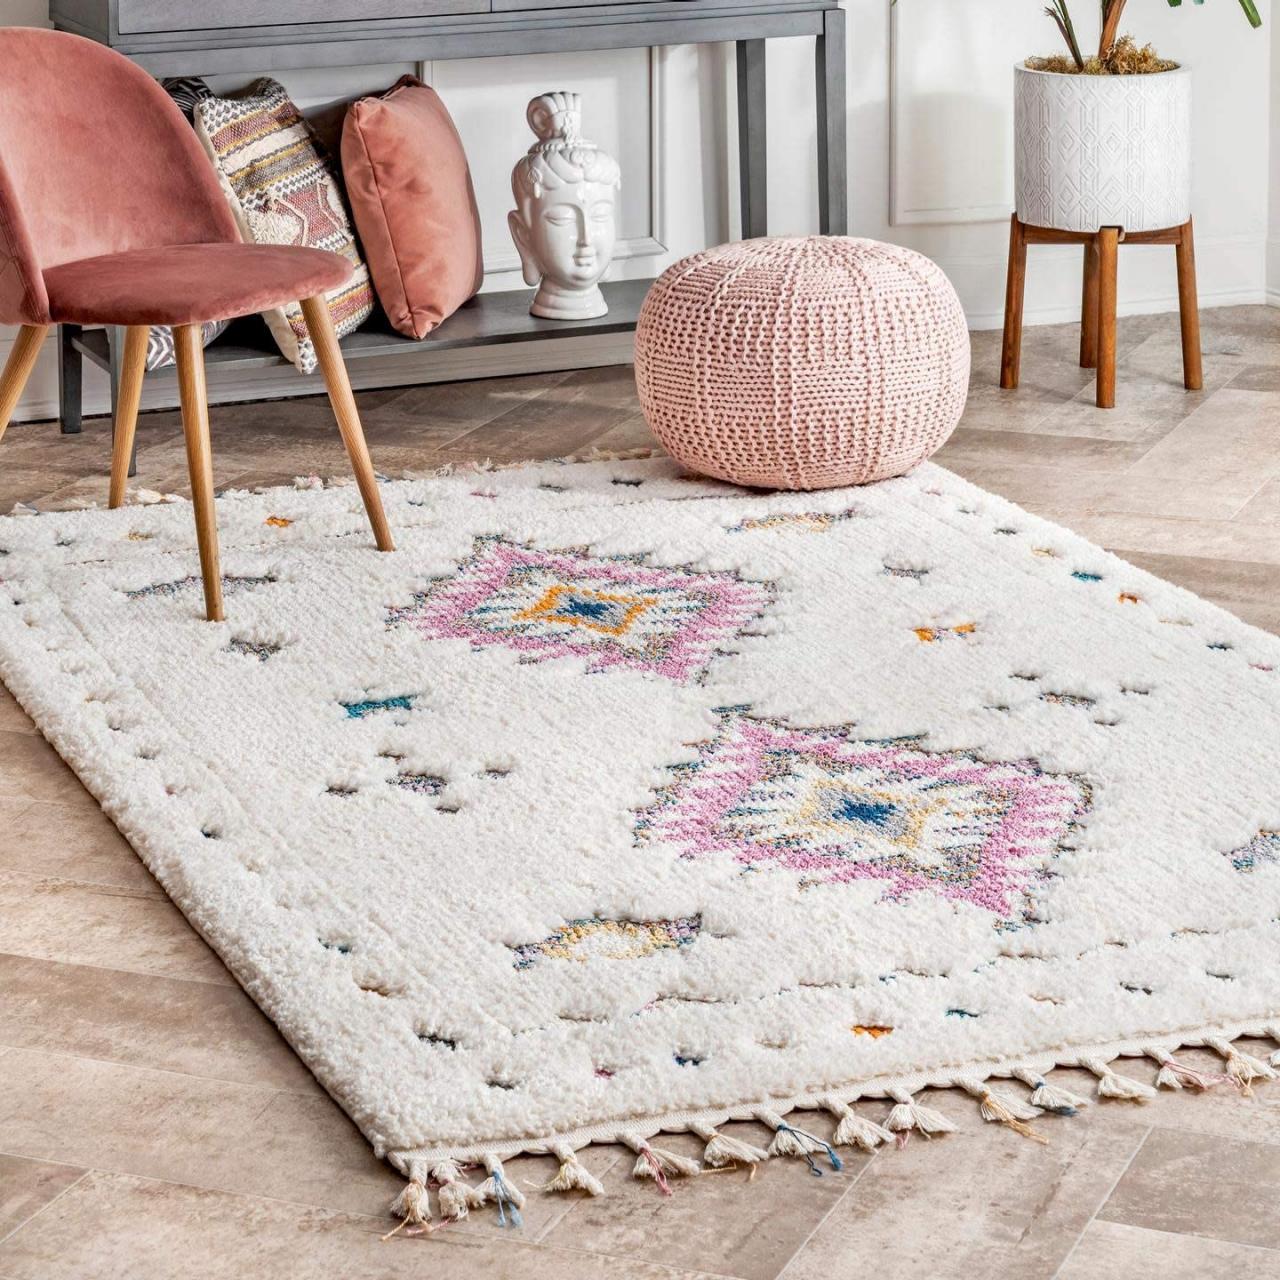 Runner Rugs: 12 Stylish, Cozy Options For Your Home